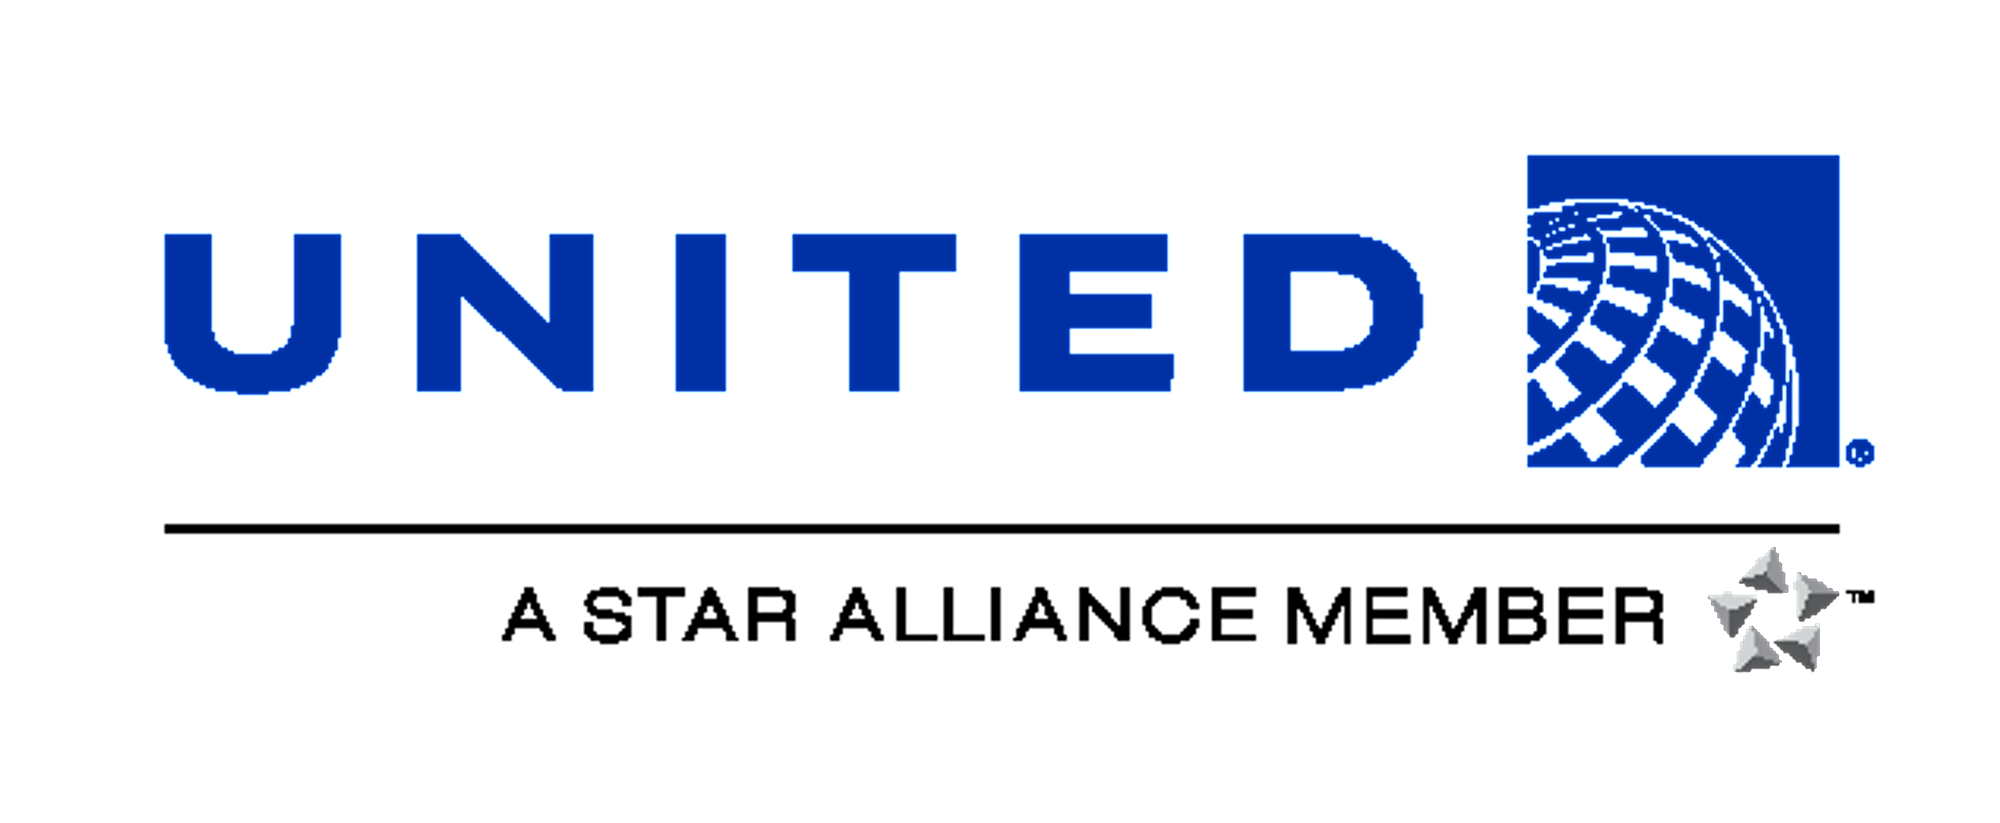 United Airlines Resuming Service Between San Francisco And Pluspng.com  - United Airlines, Transparent background PNG HD thumbnail